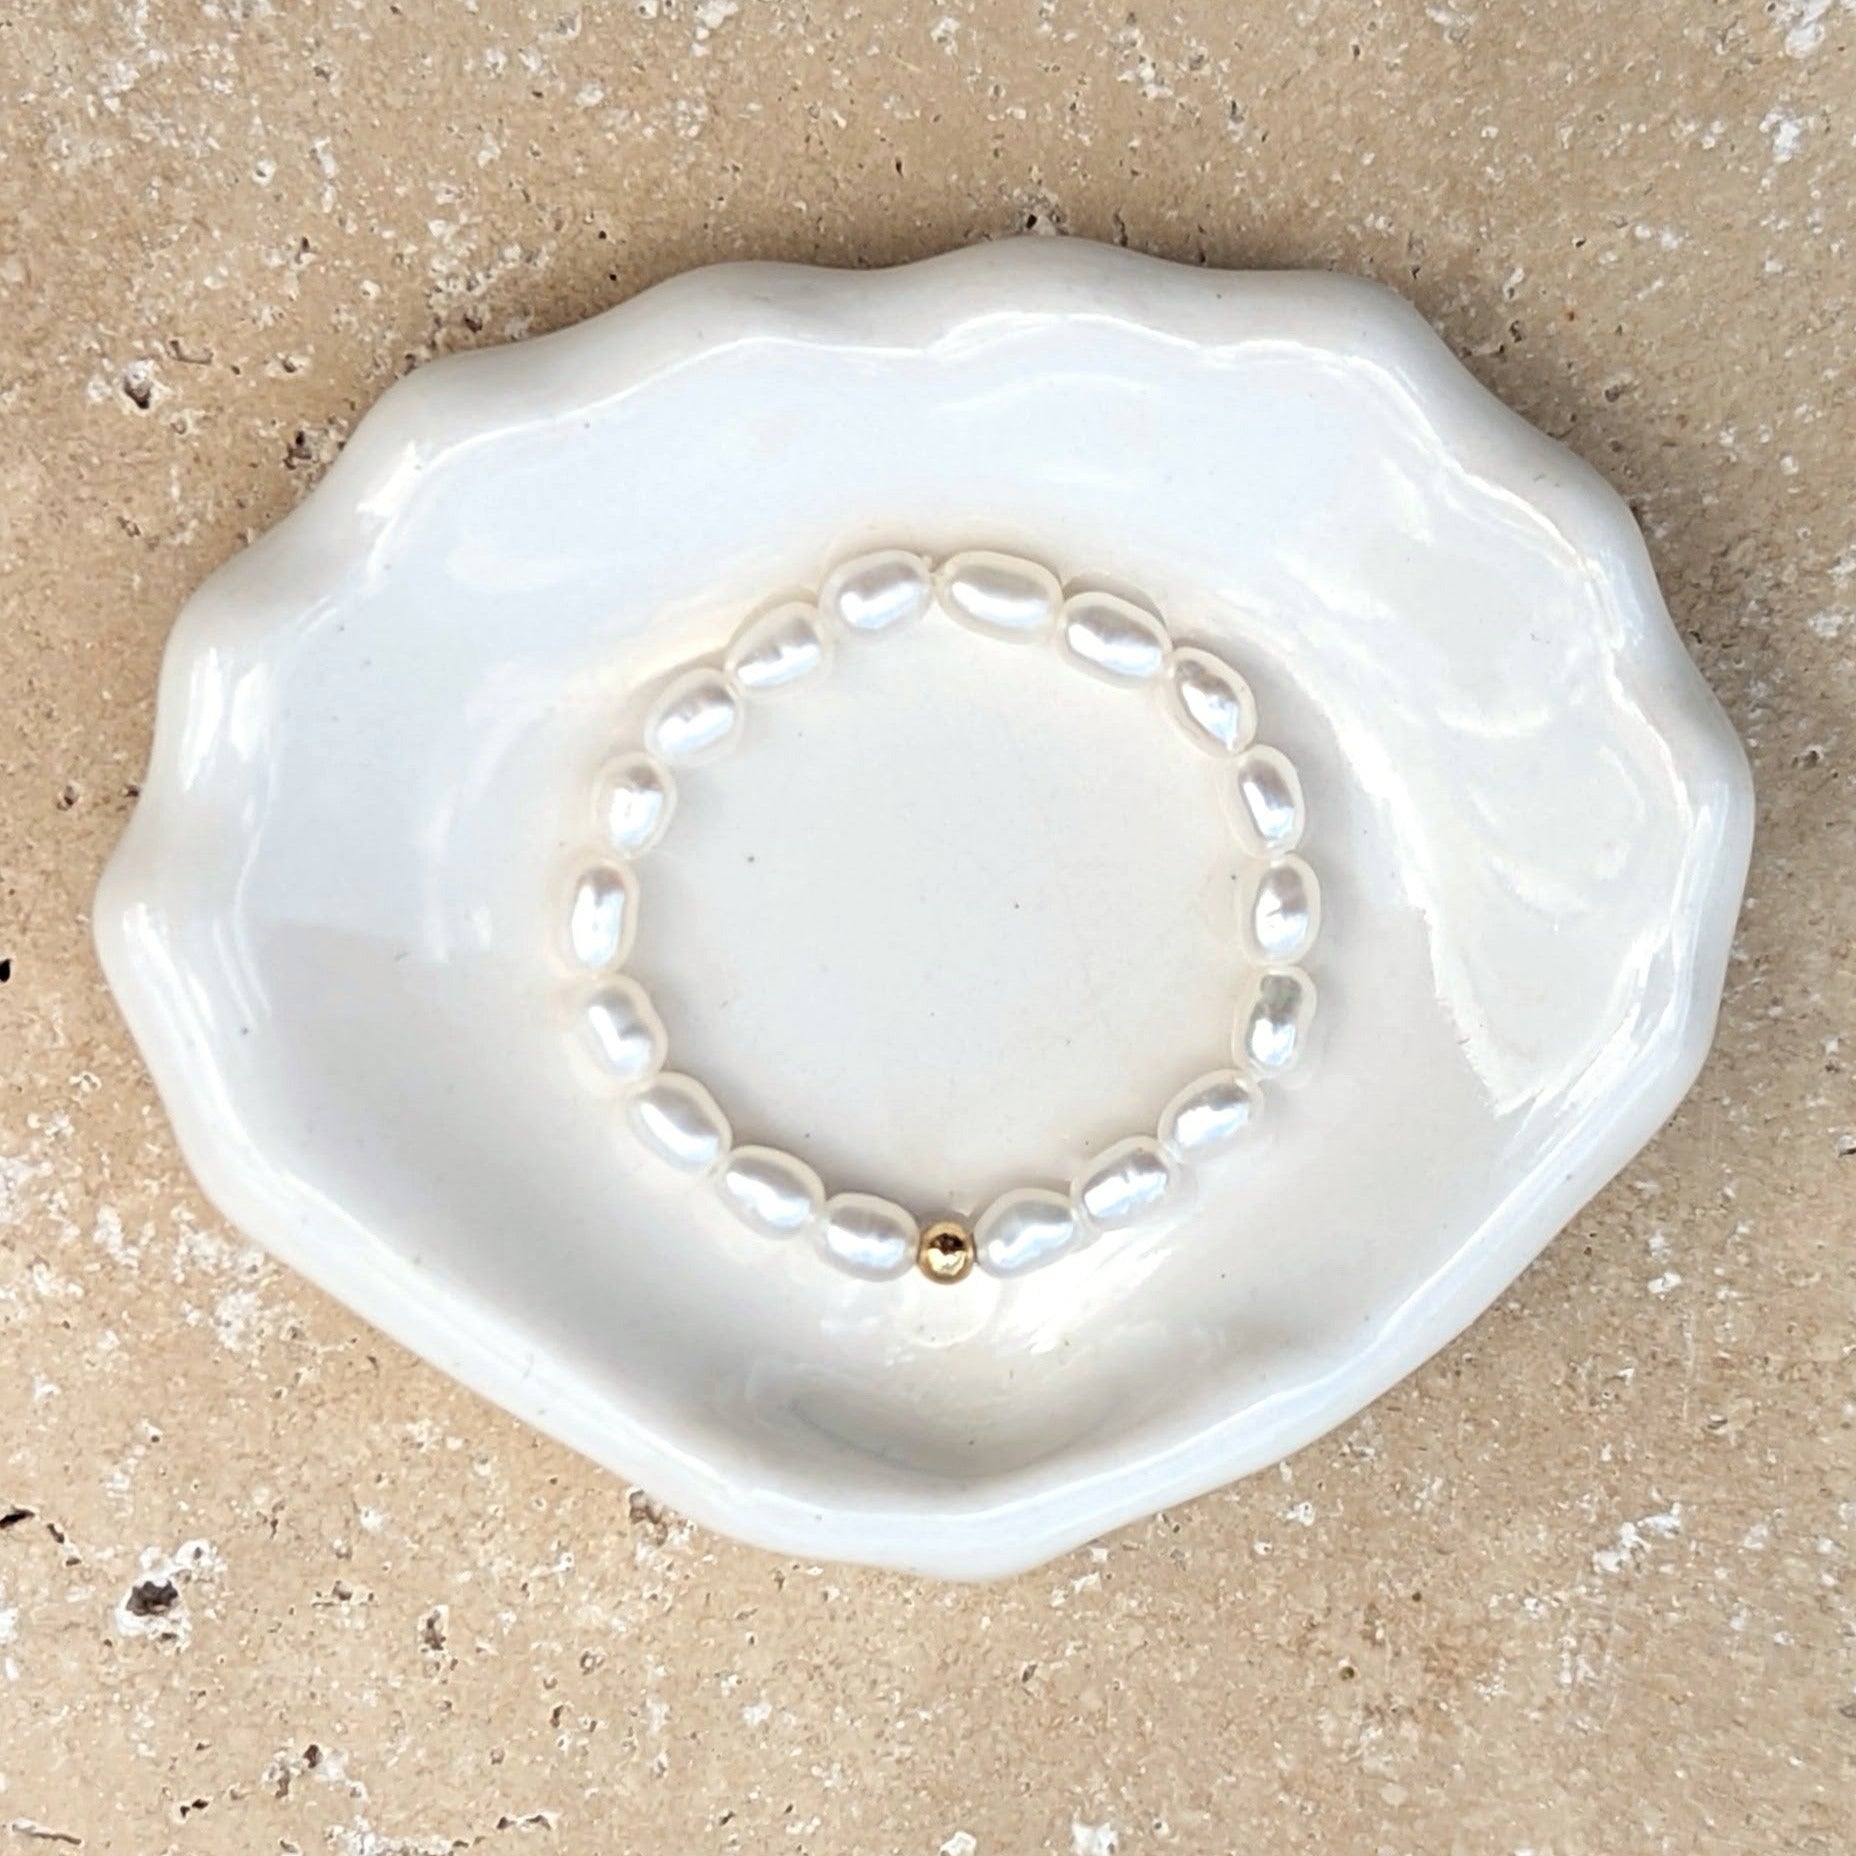 Shell shaped dish with a pearl ring with a small gold bead